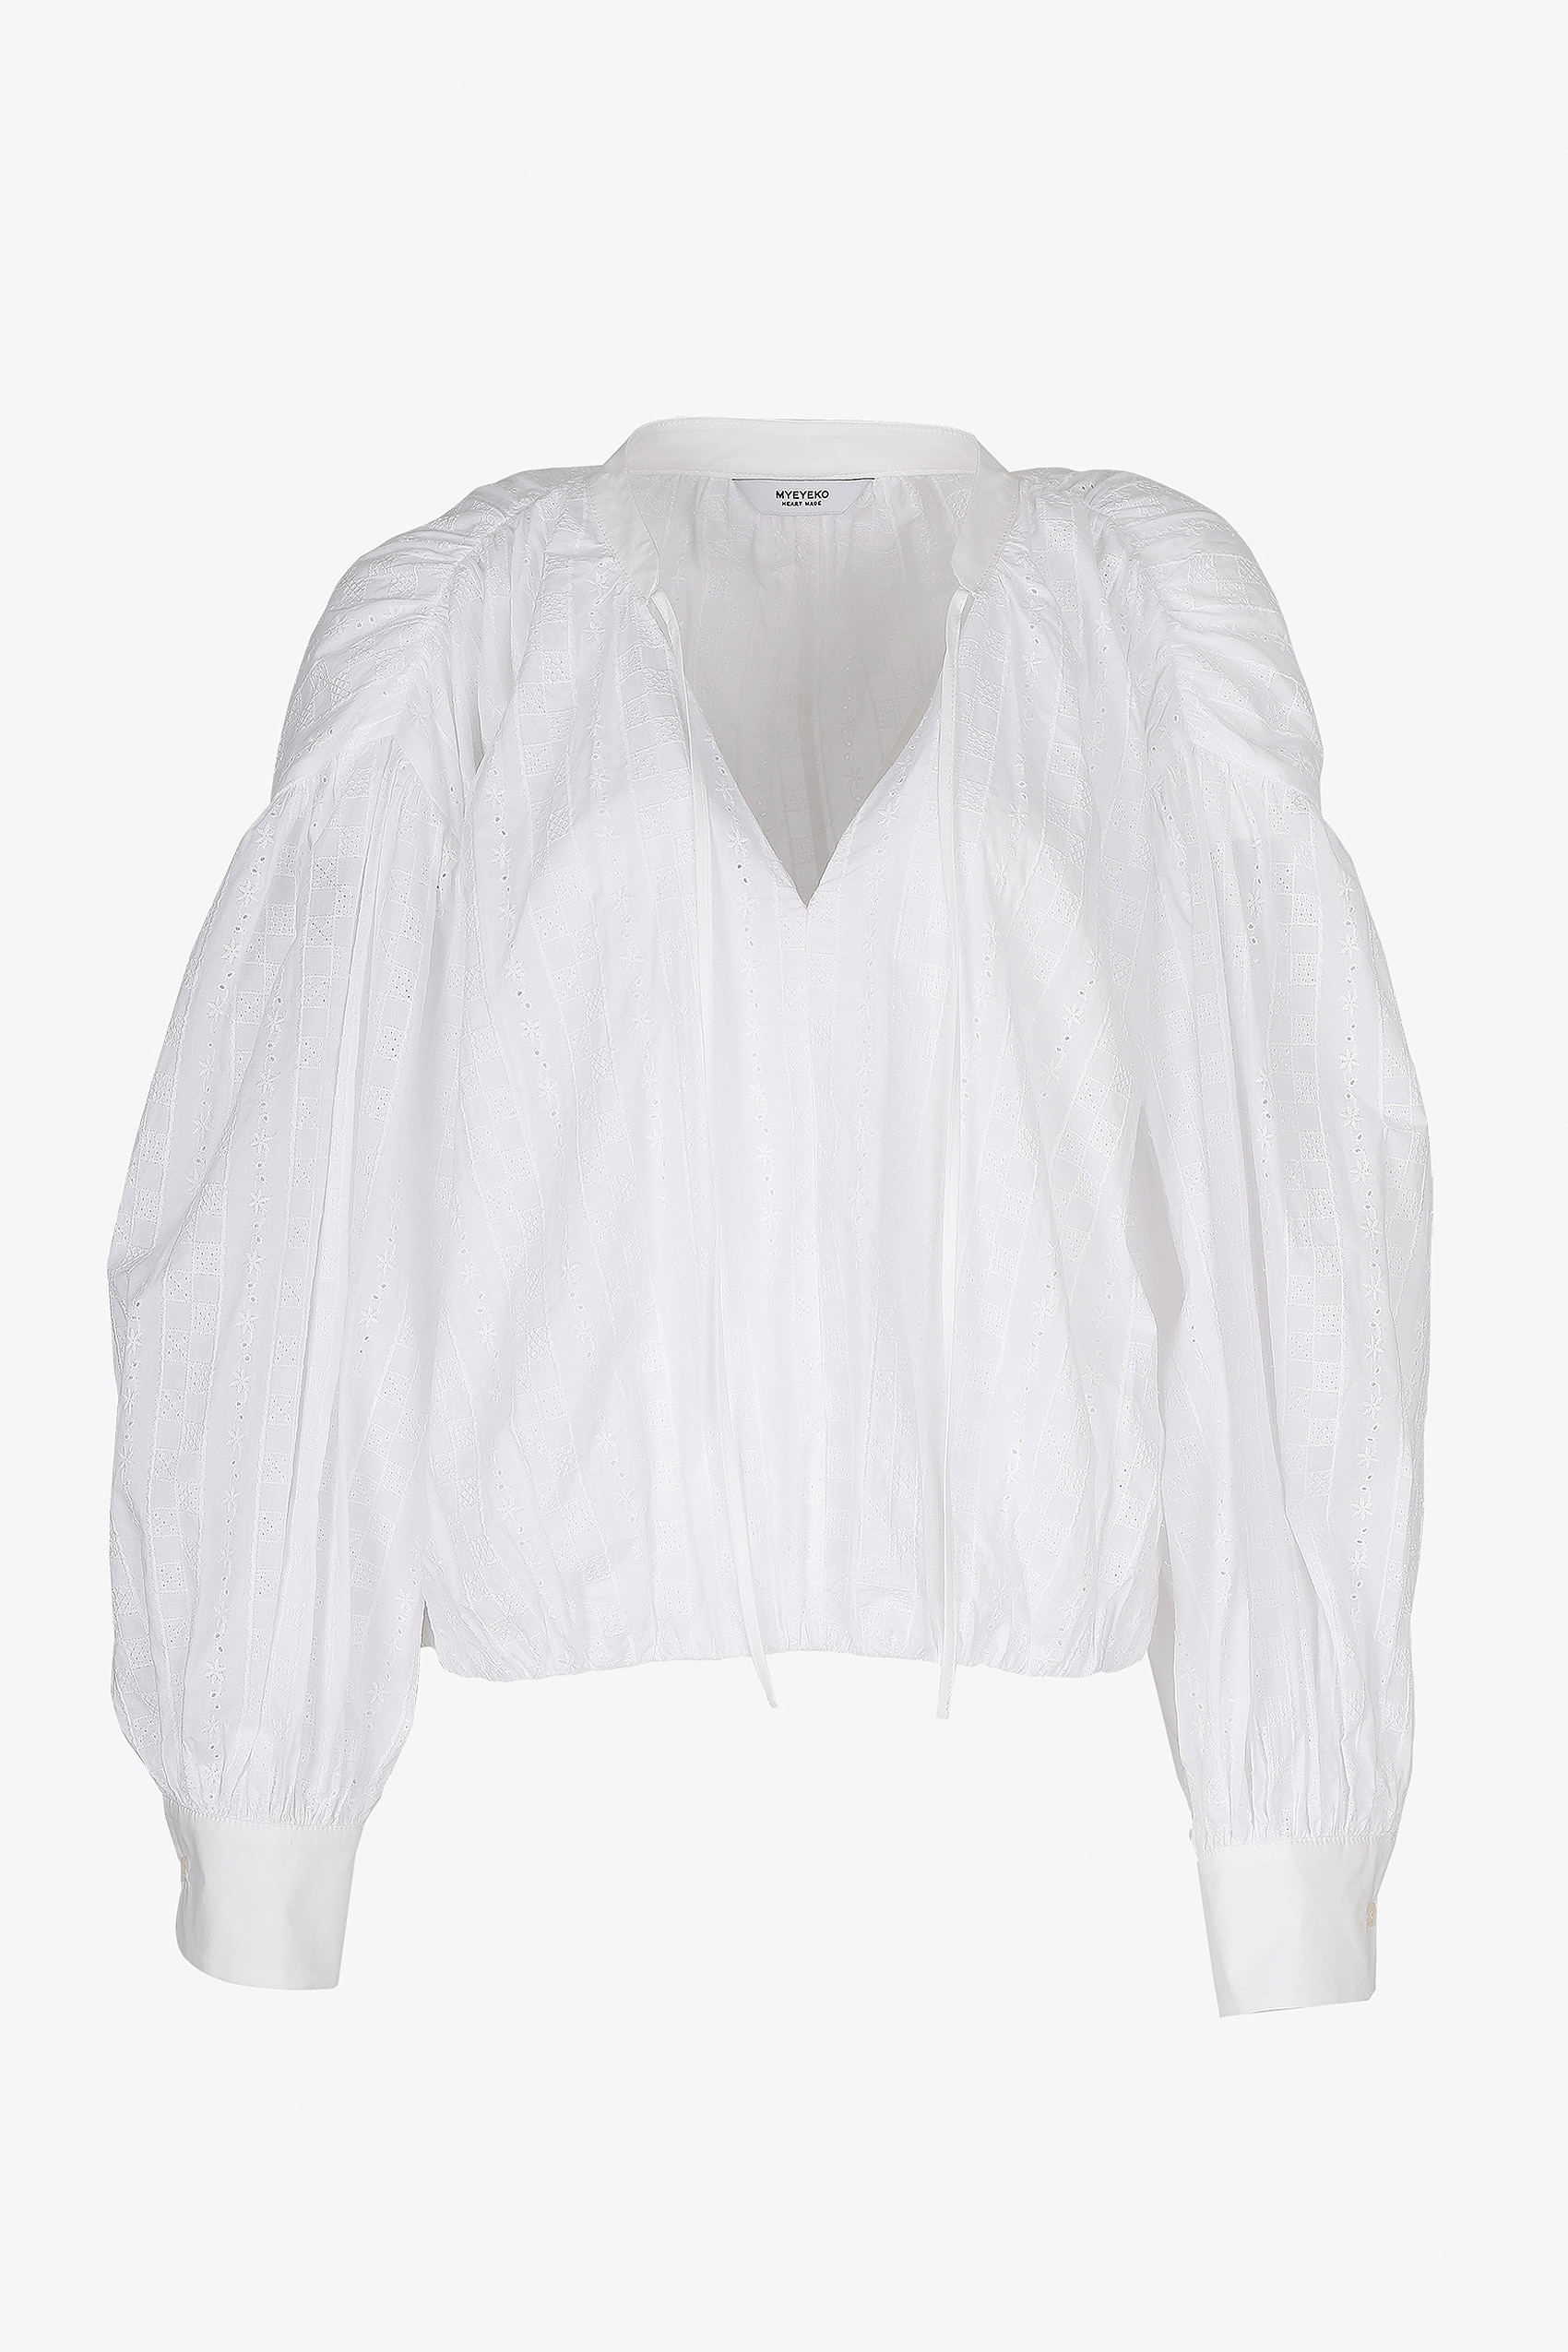 HIGH QUALITY LINE - White Eyelet Blouse (Fabric by UNI TEXITLE, Made in JAPAN)